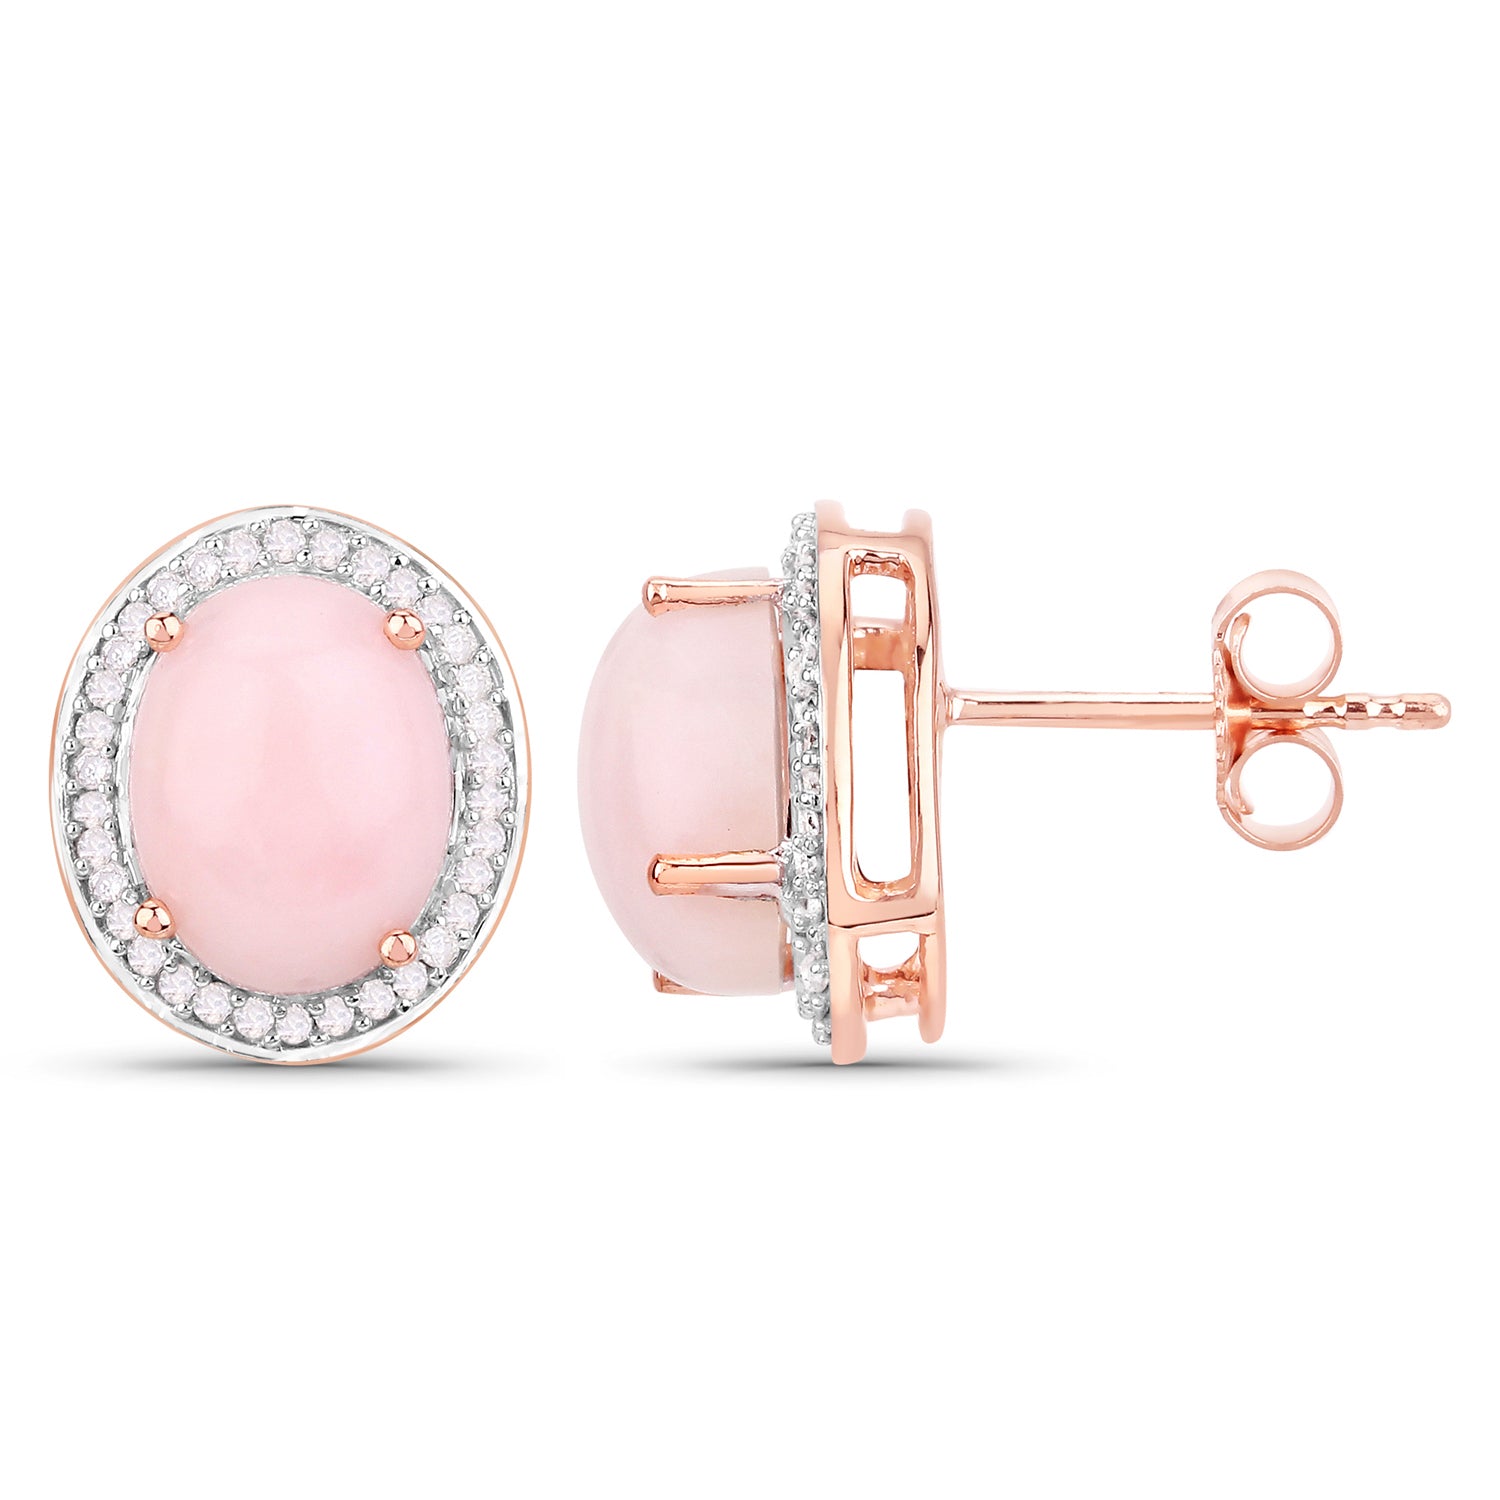 14K Rose Gold 3.34 Carat Genuine Pink Opal and White Diamond Earrings